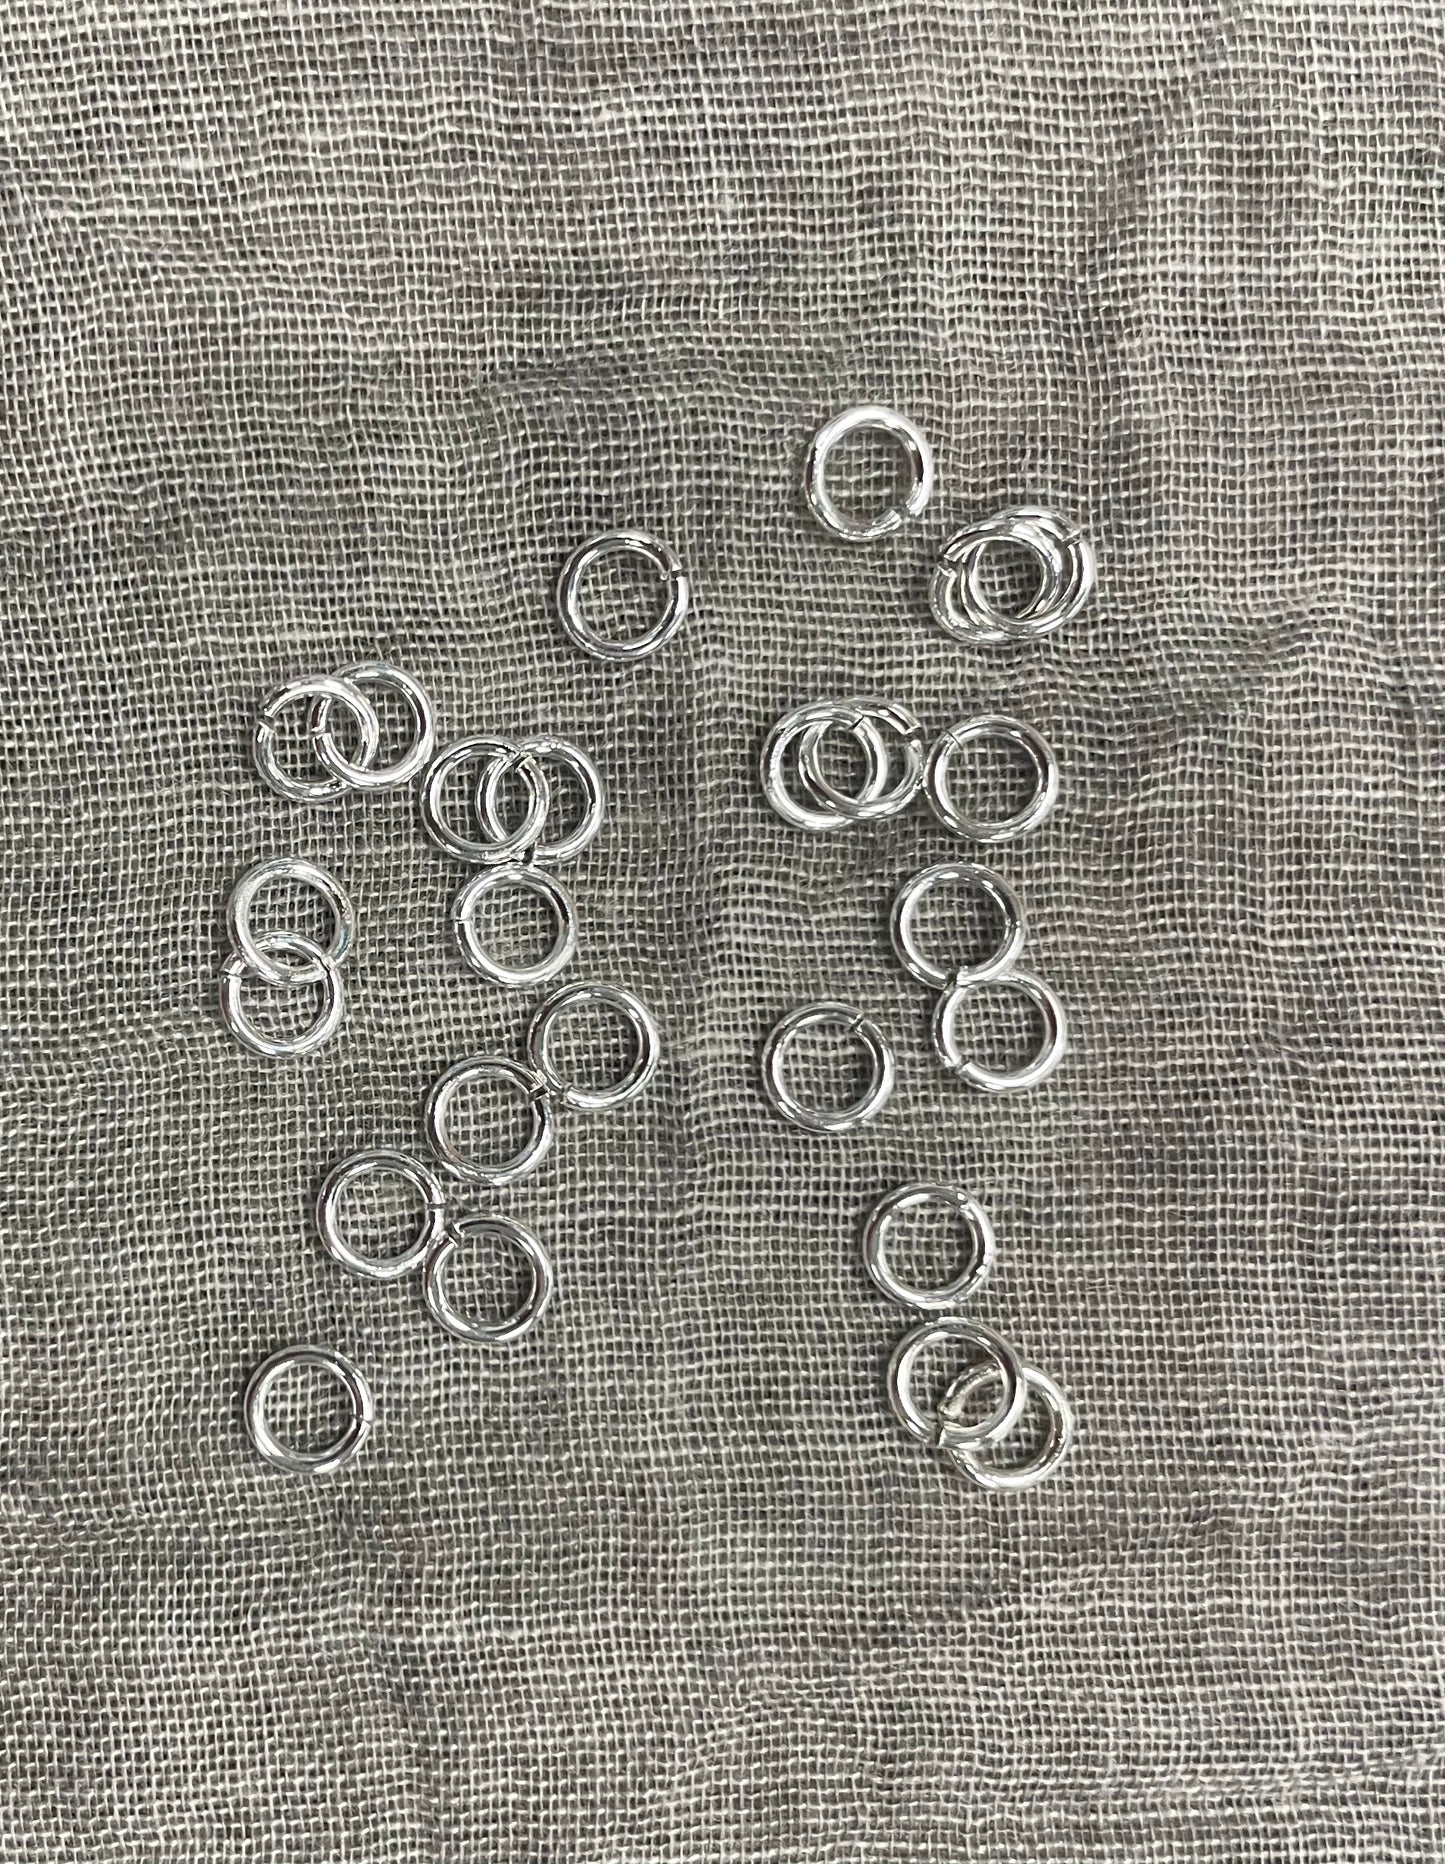 6 mm Open Jump Ring: 18 Gauge, Shiny Silver Plate, 25 pieces